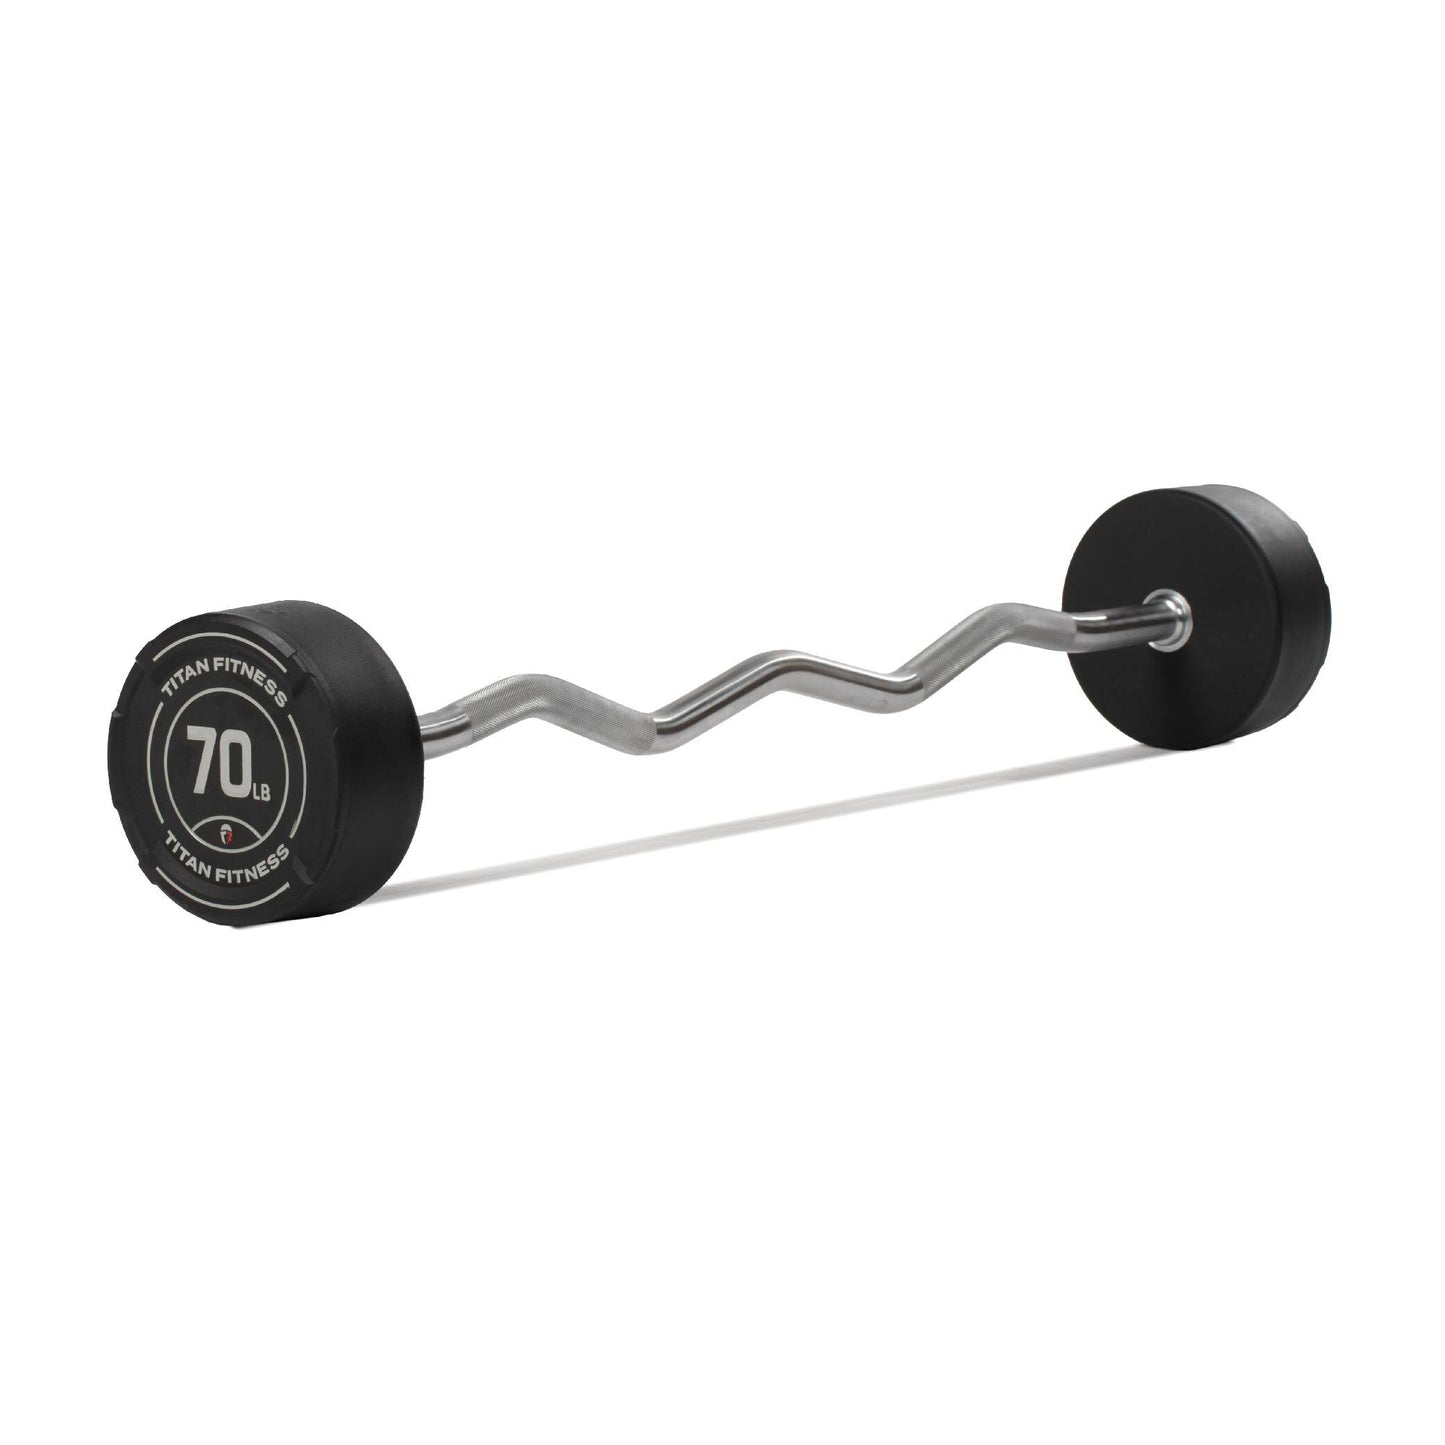 70 LB EZ Curl Fixed Rubber Barbell - view 1